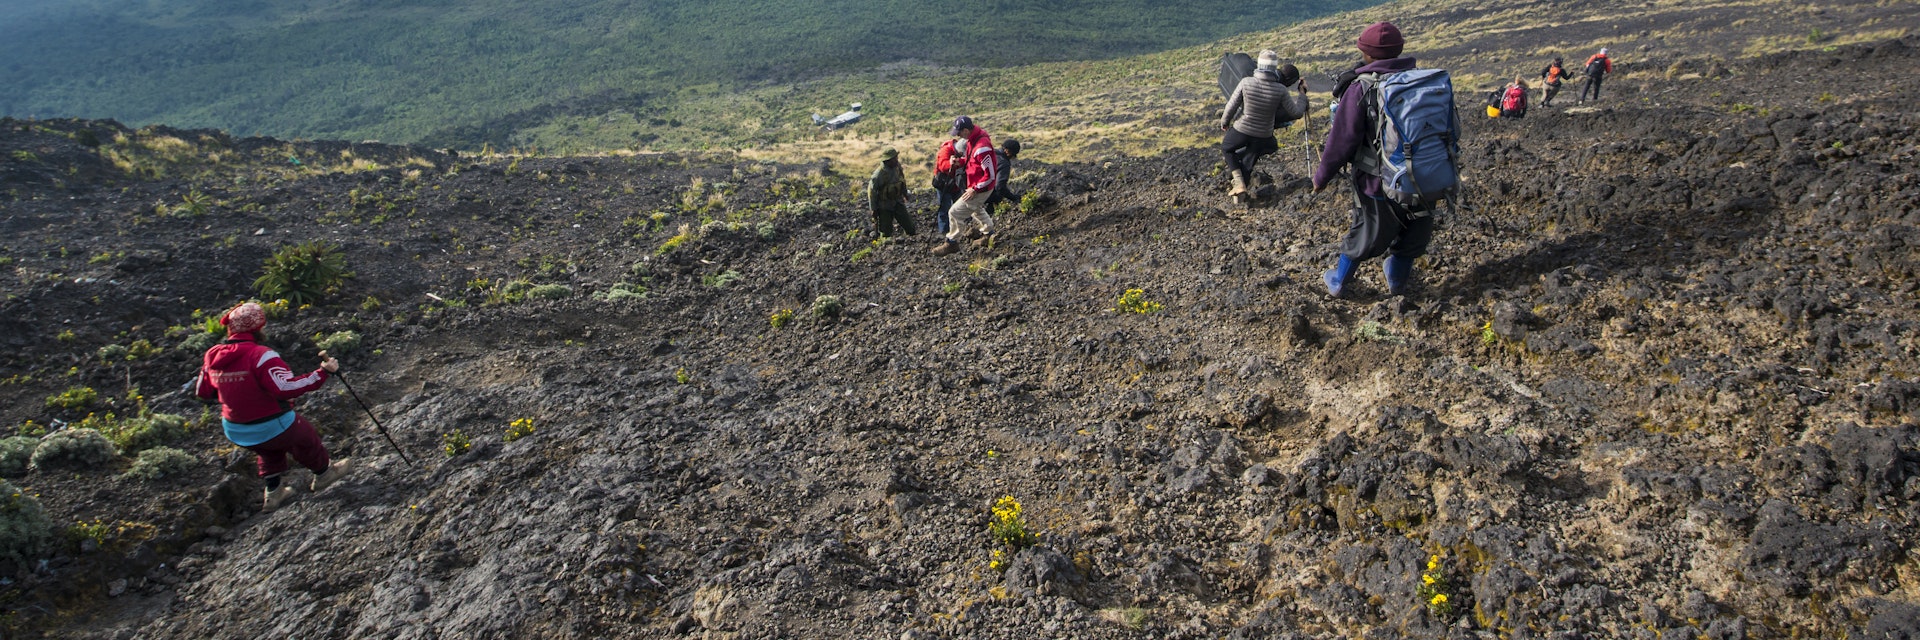 A group of western trekking tourists together with their local porters and guides descencing from the crater rim of Nyiragongo Volcano in Virunga National Park in January 2016.